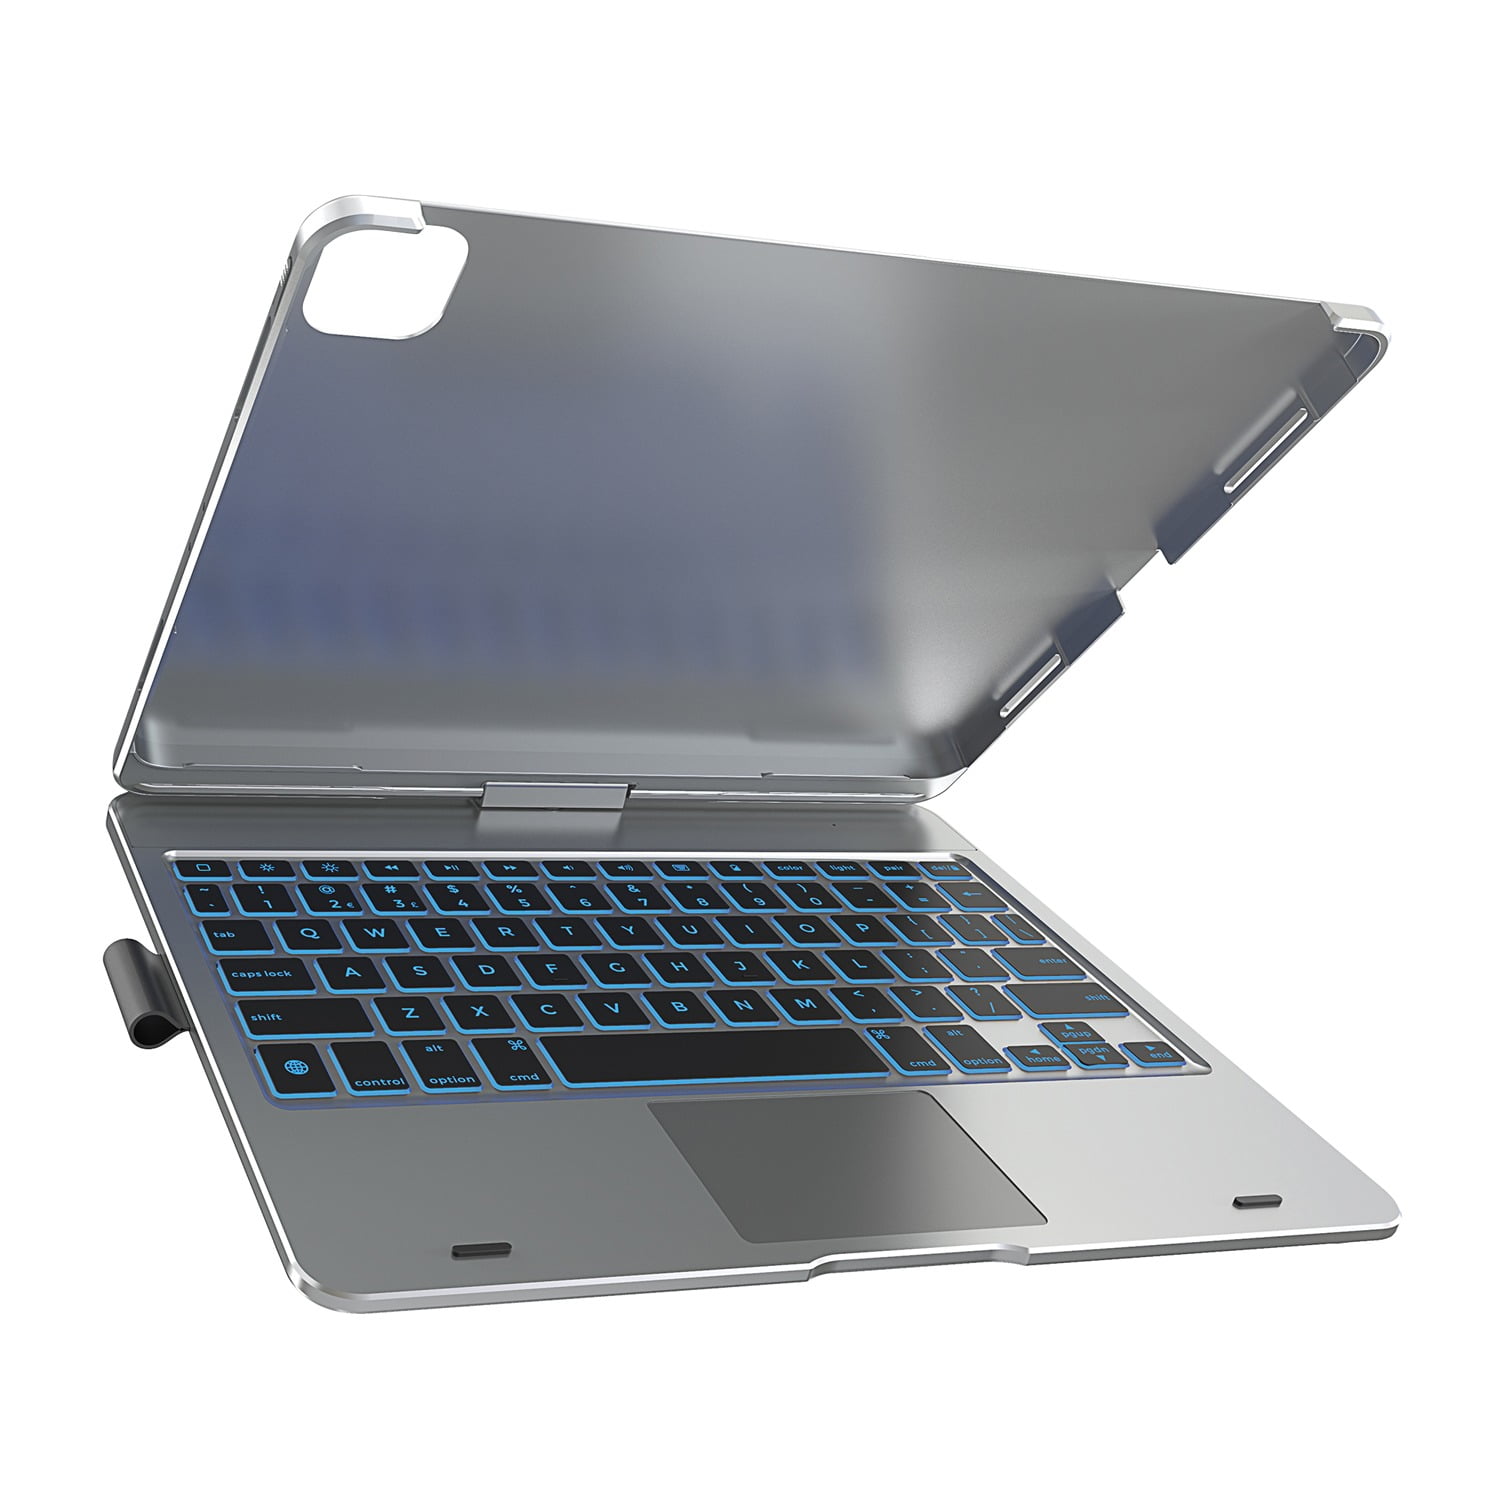 Typecase Flexbook Touch Gray 6in1 Keyboard Case For iPad 7, Air 3. Pro 10.5